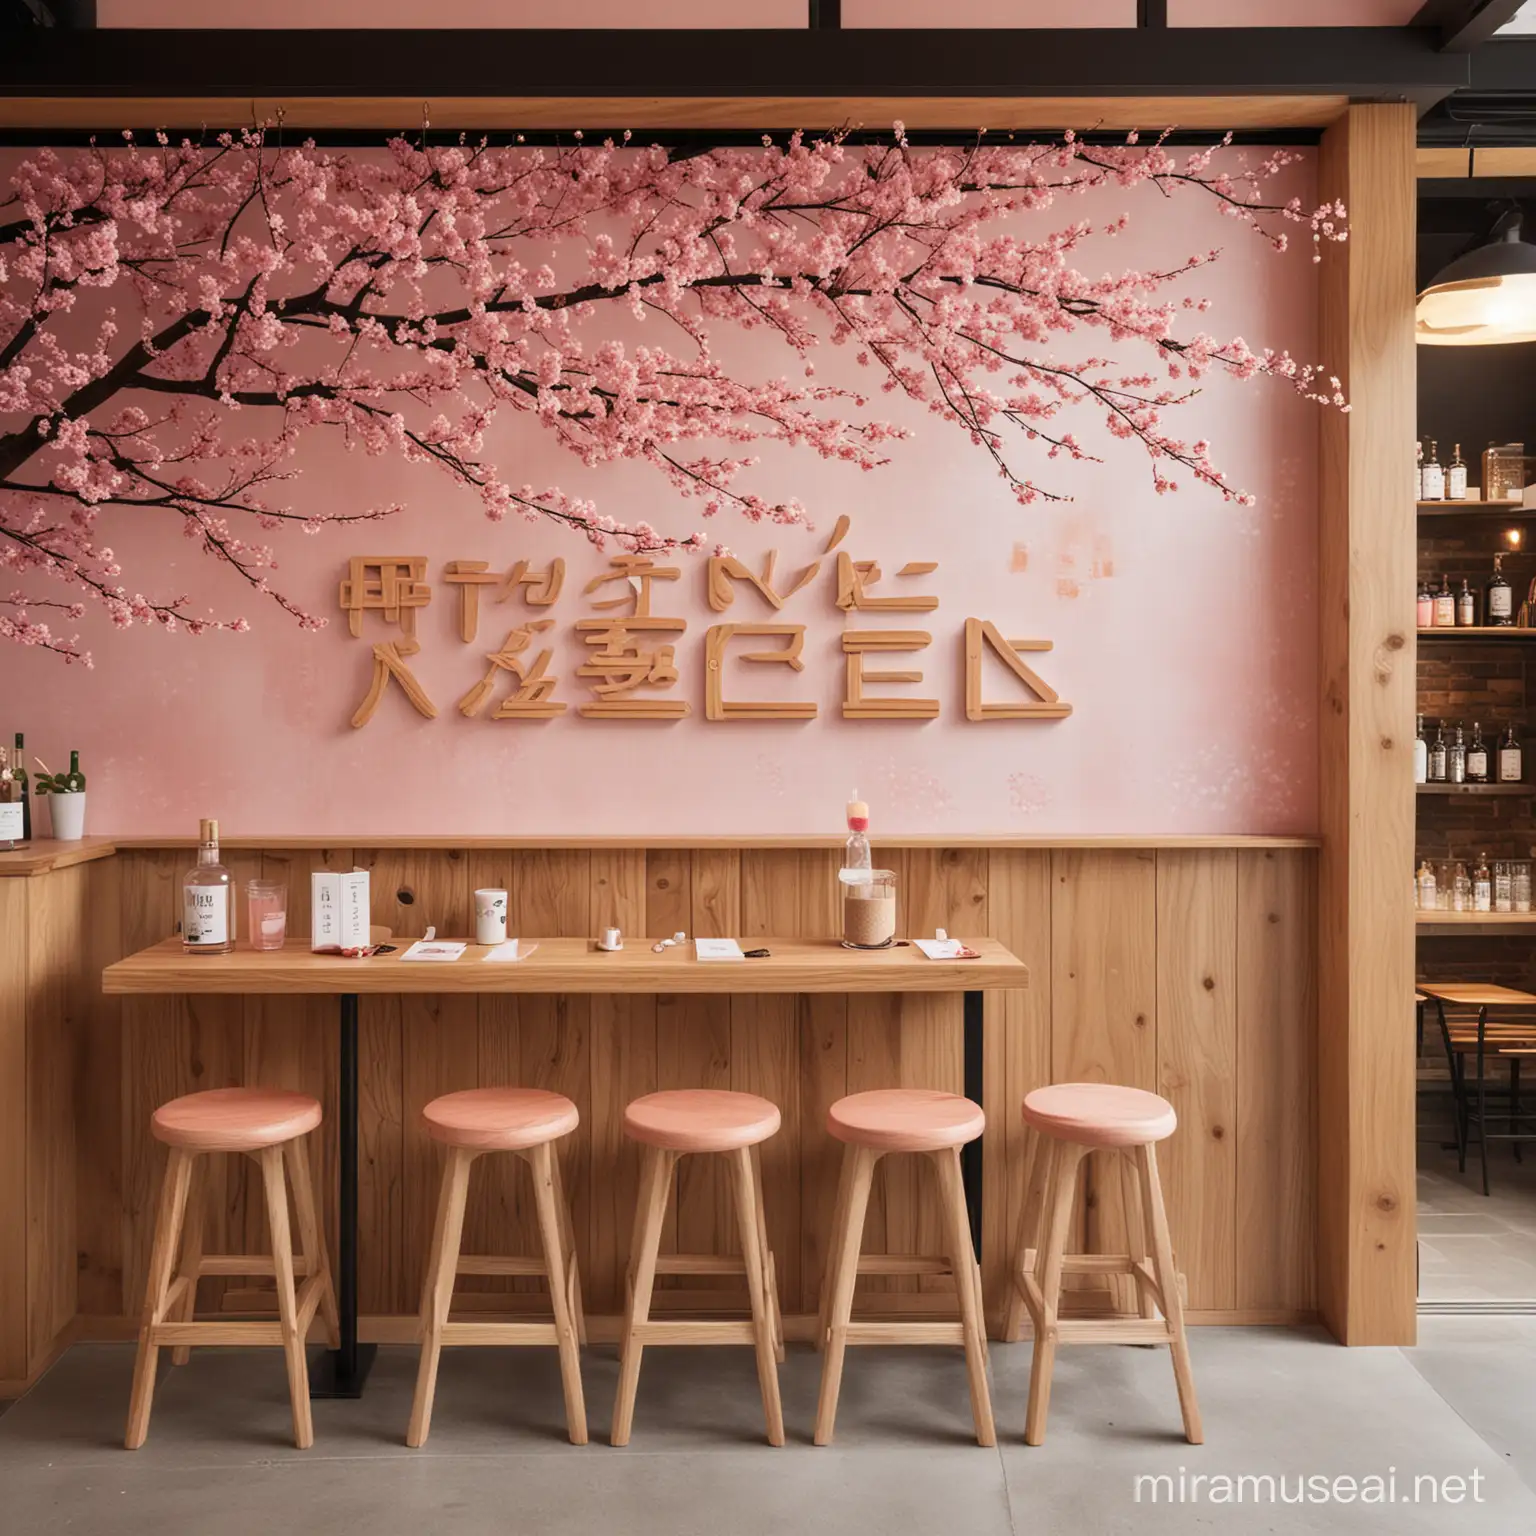 Ramen meets Gin artwork with japanese design style. Pink cherry blossom and a small ramen bar with minimal wooden high seating. Japanese letters on the wall and pink cherry blossoms